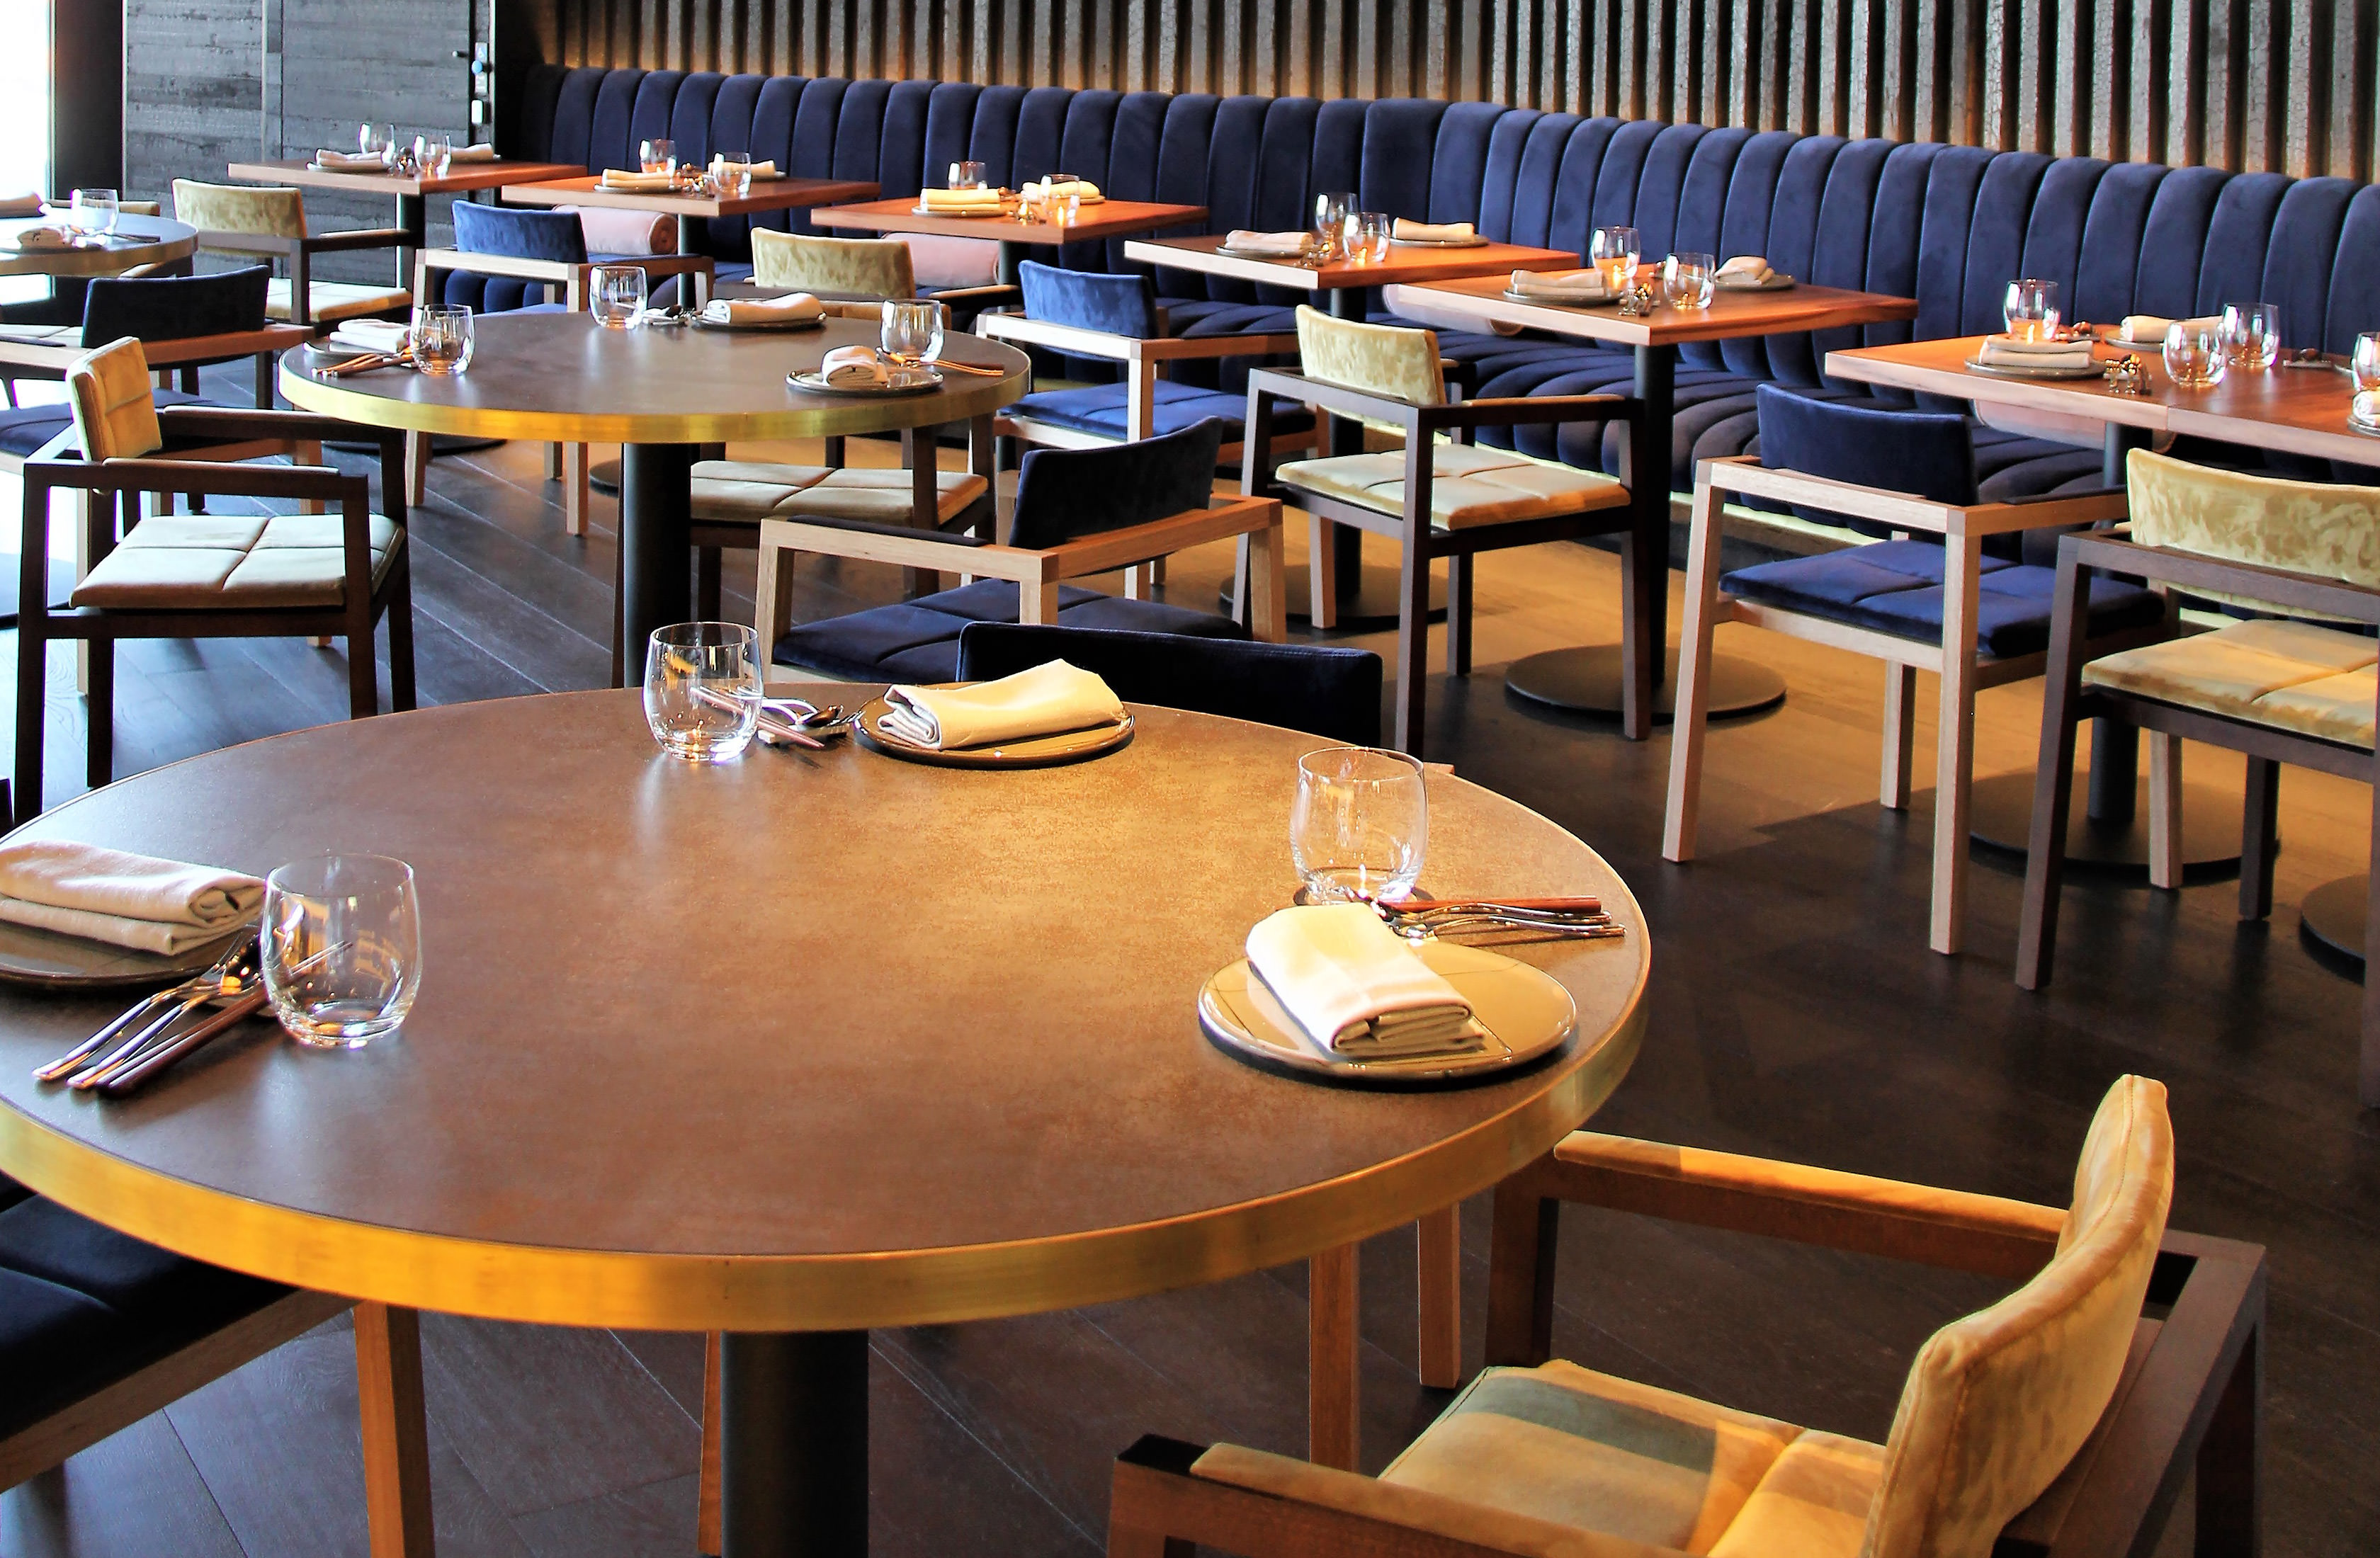 The solid walnut and velvet chairs greet you as you enter this modern Japanese restaurant for an evening of delight